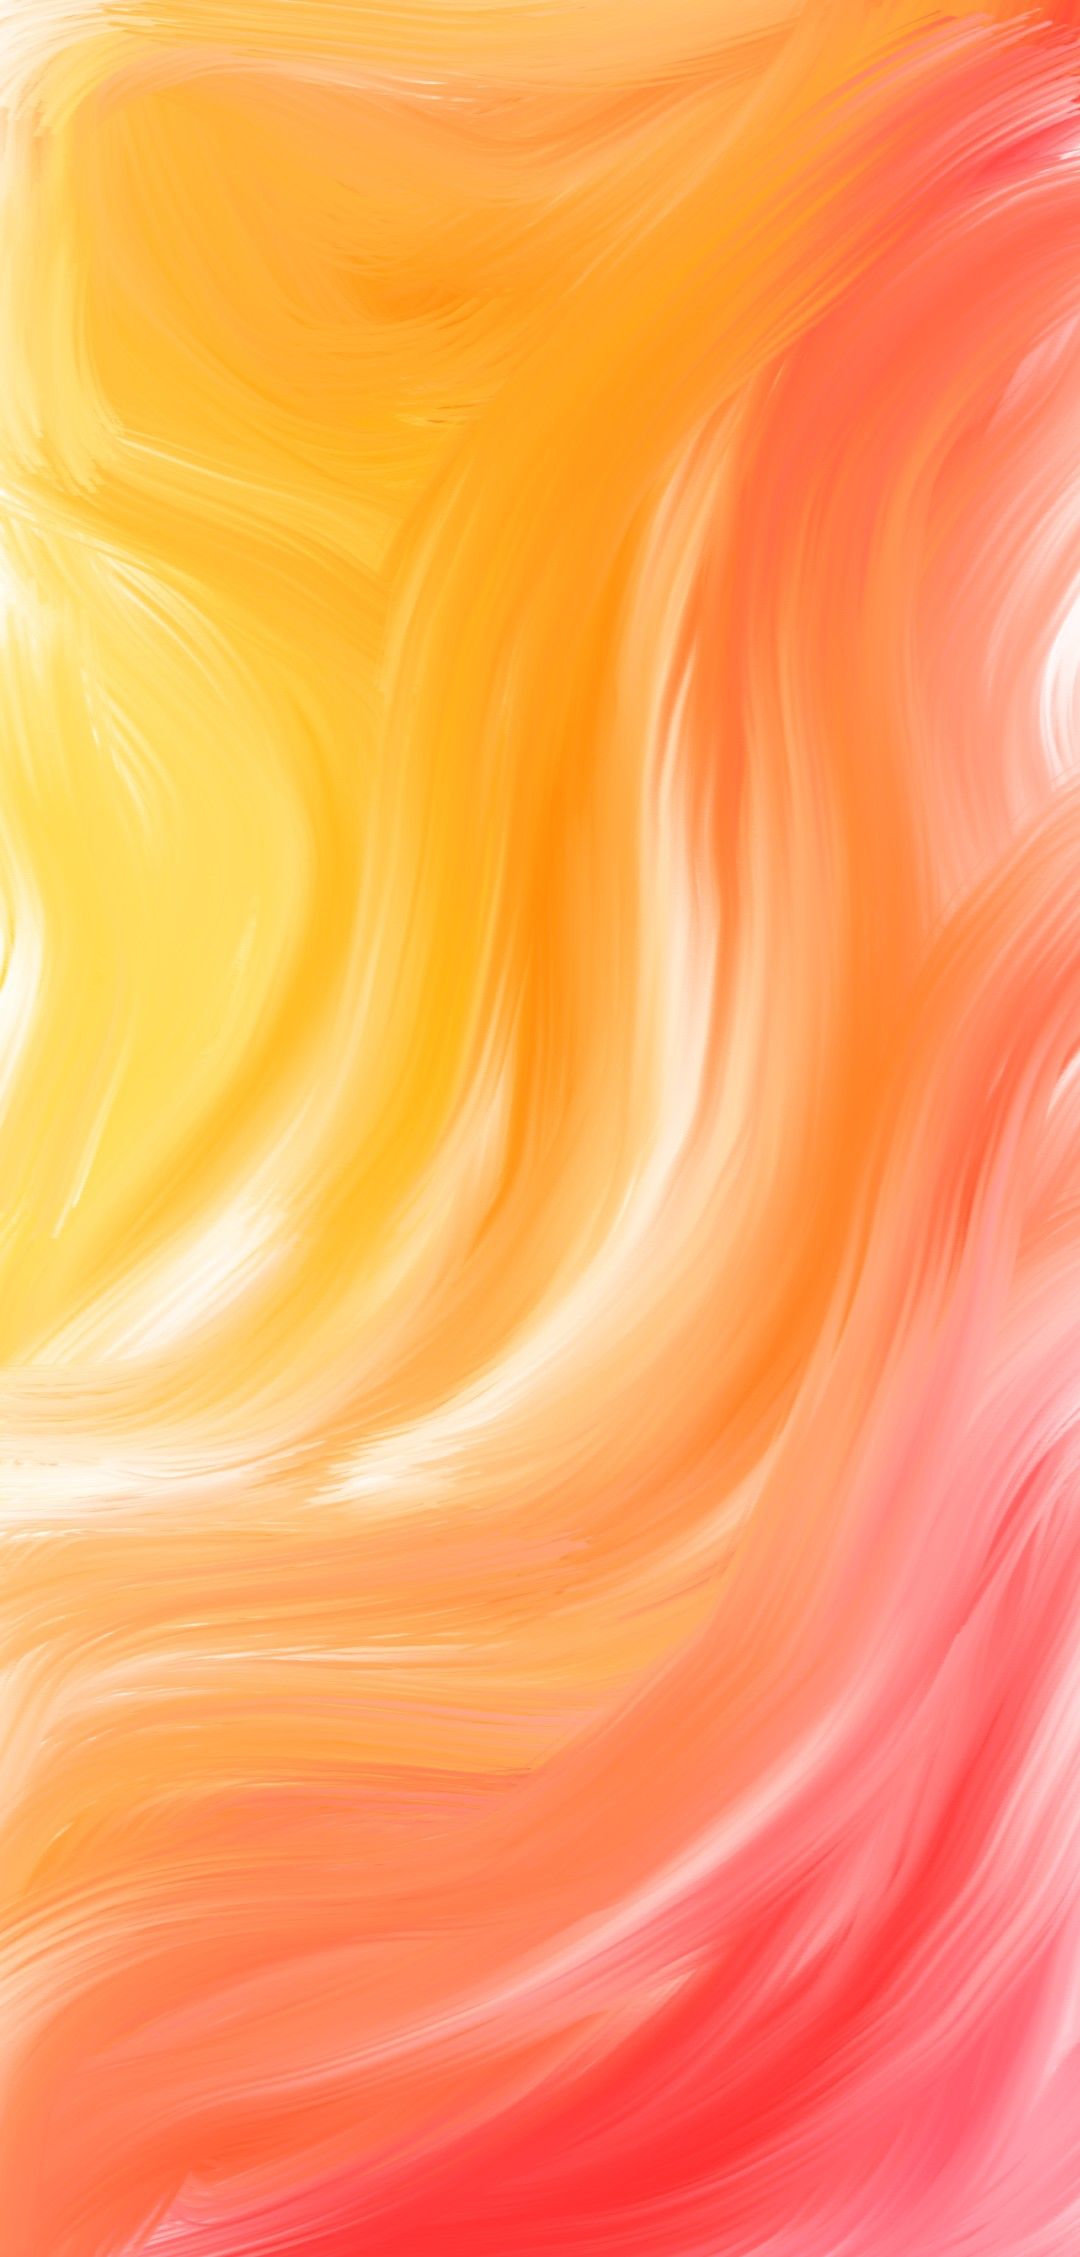 Waves Aesthetic wallpaper. Art sketches, Abstract, Aesthetic wallpaper